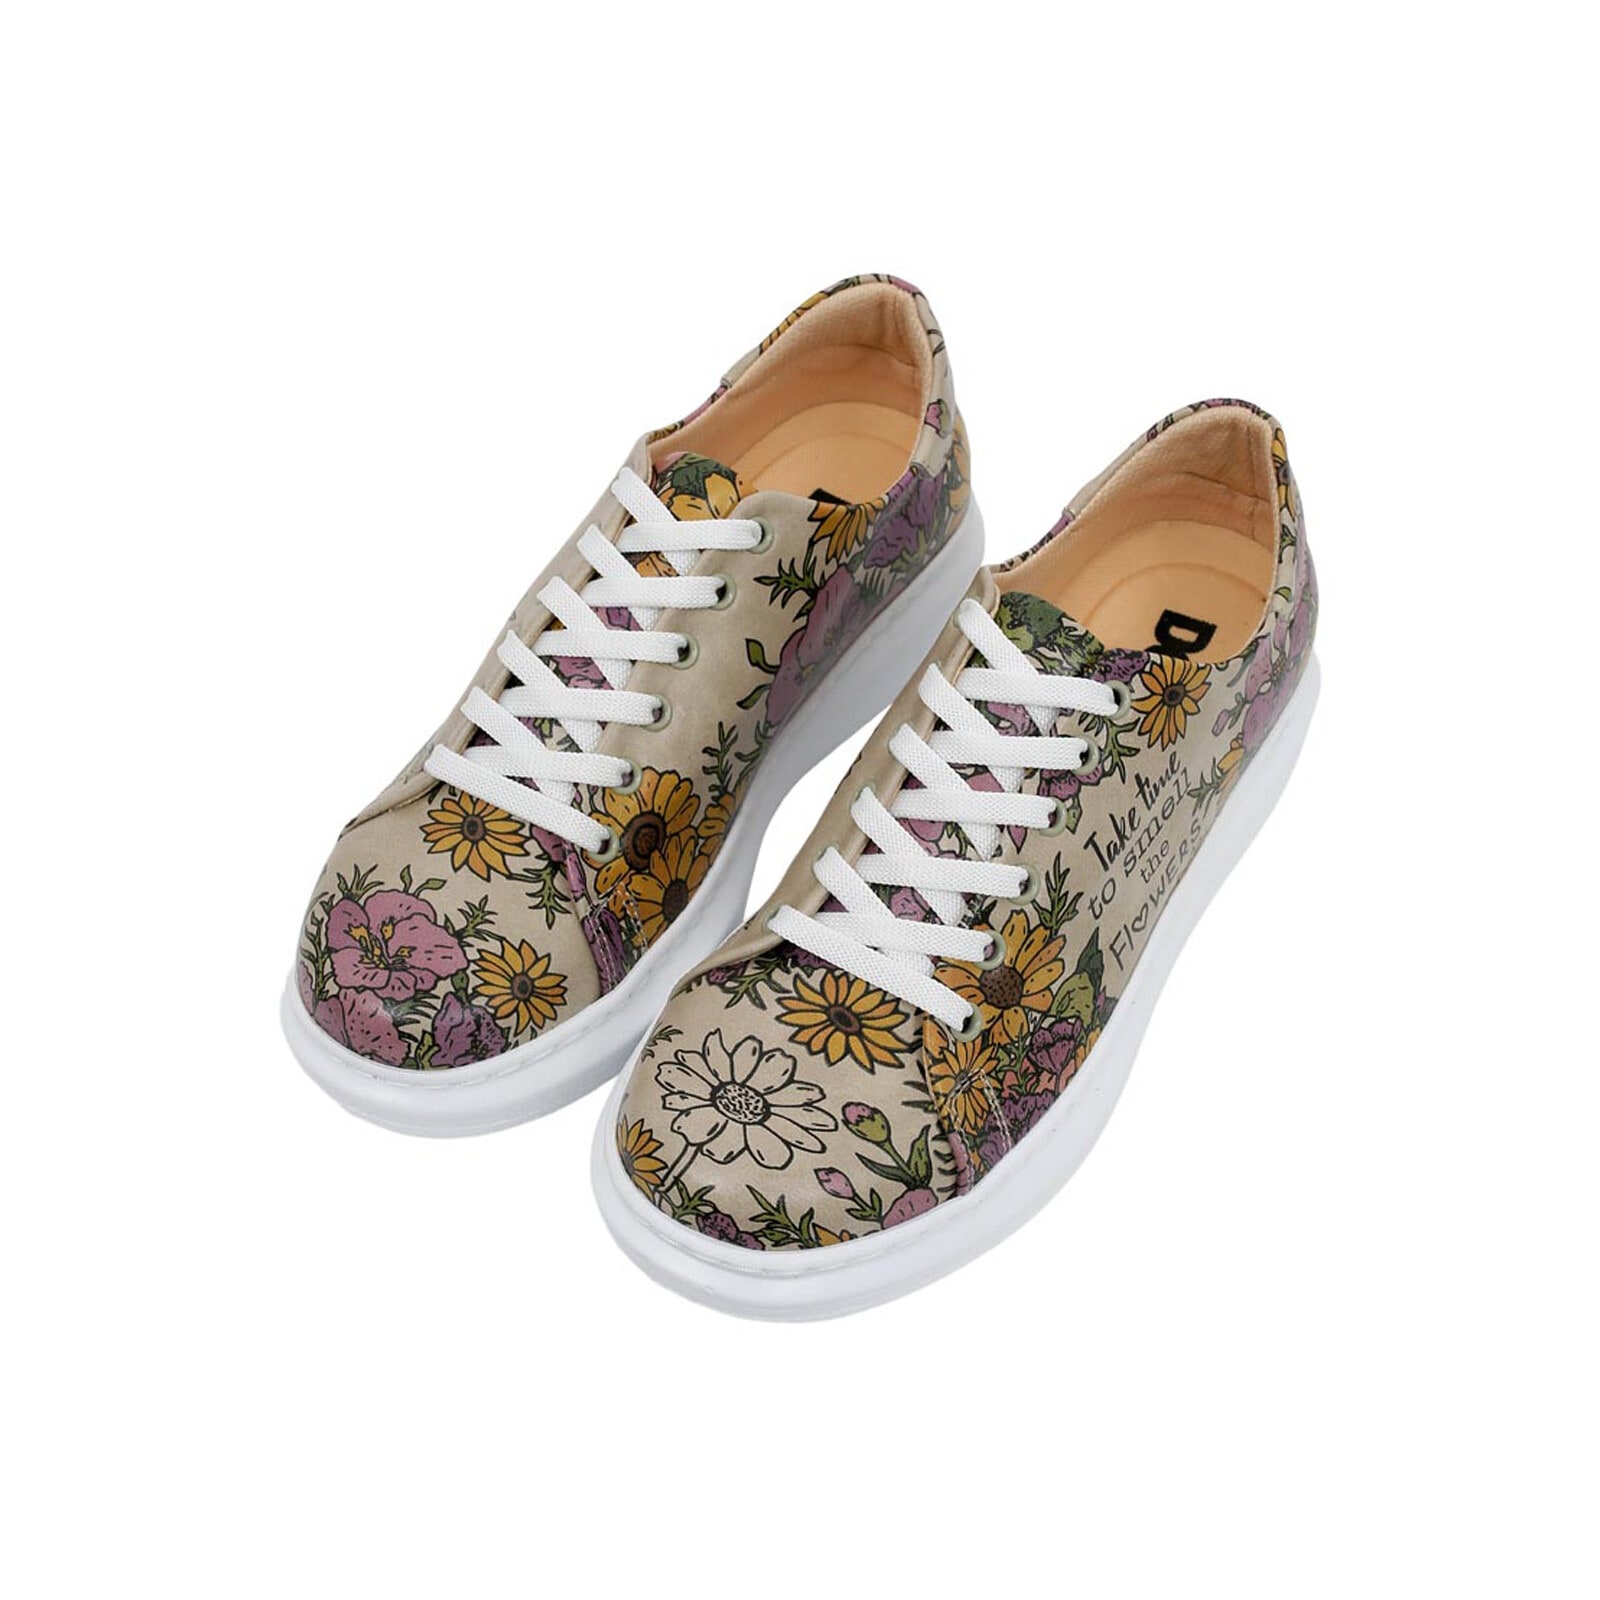 DOGO Plateausneaker »Smell the flowers«